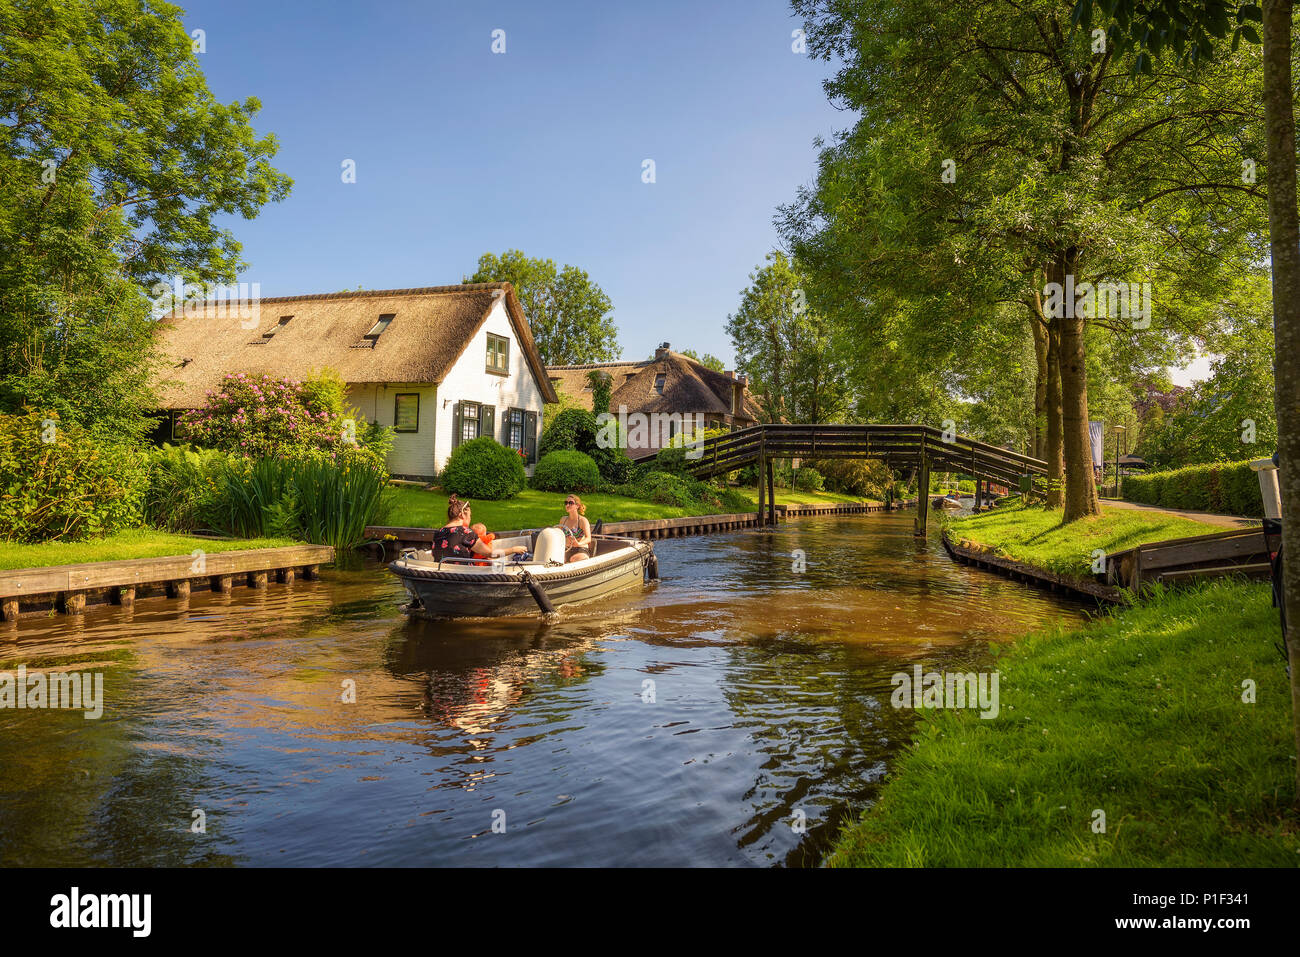 Tourists on a boat in the village of Giethoorn, Netherlands Stock Photo